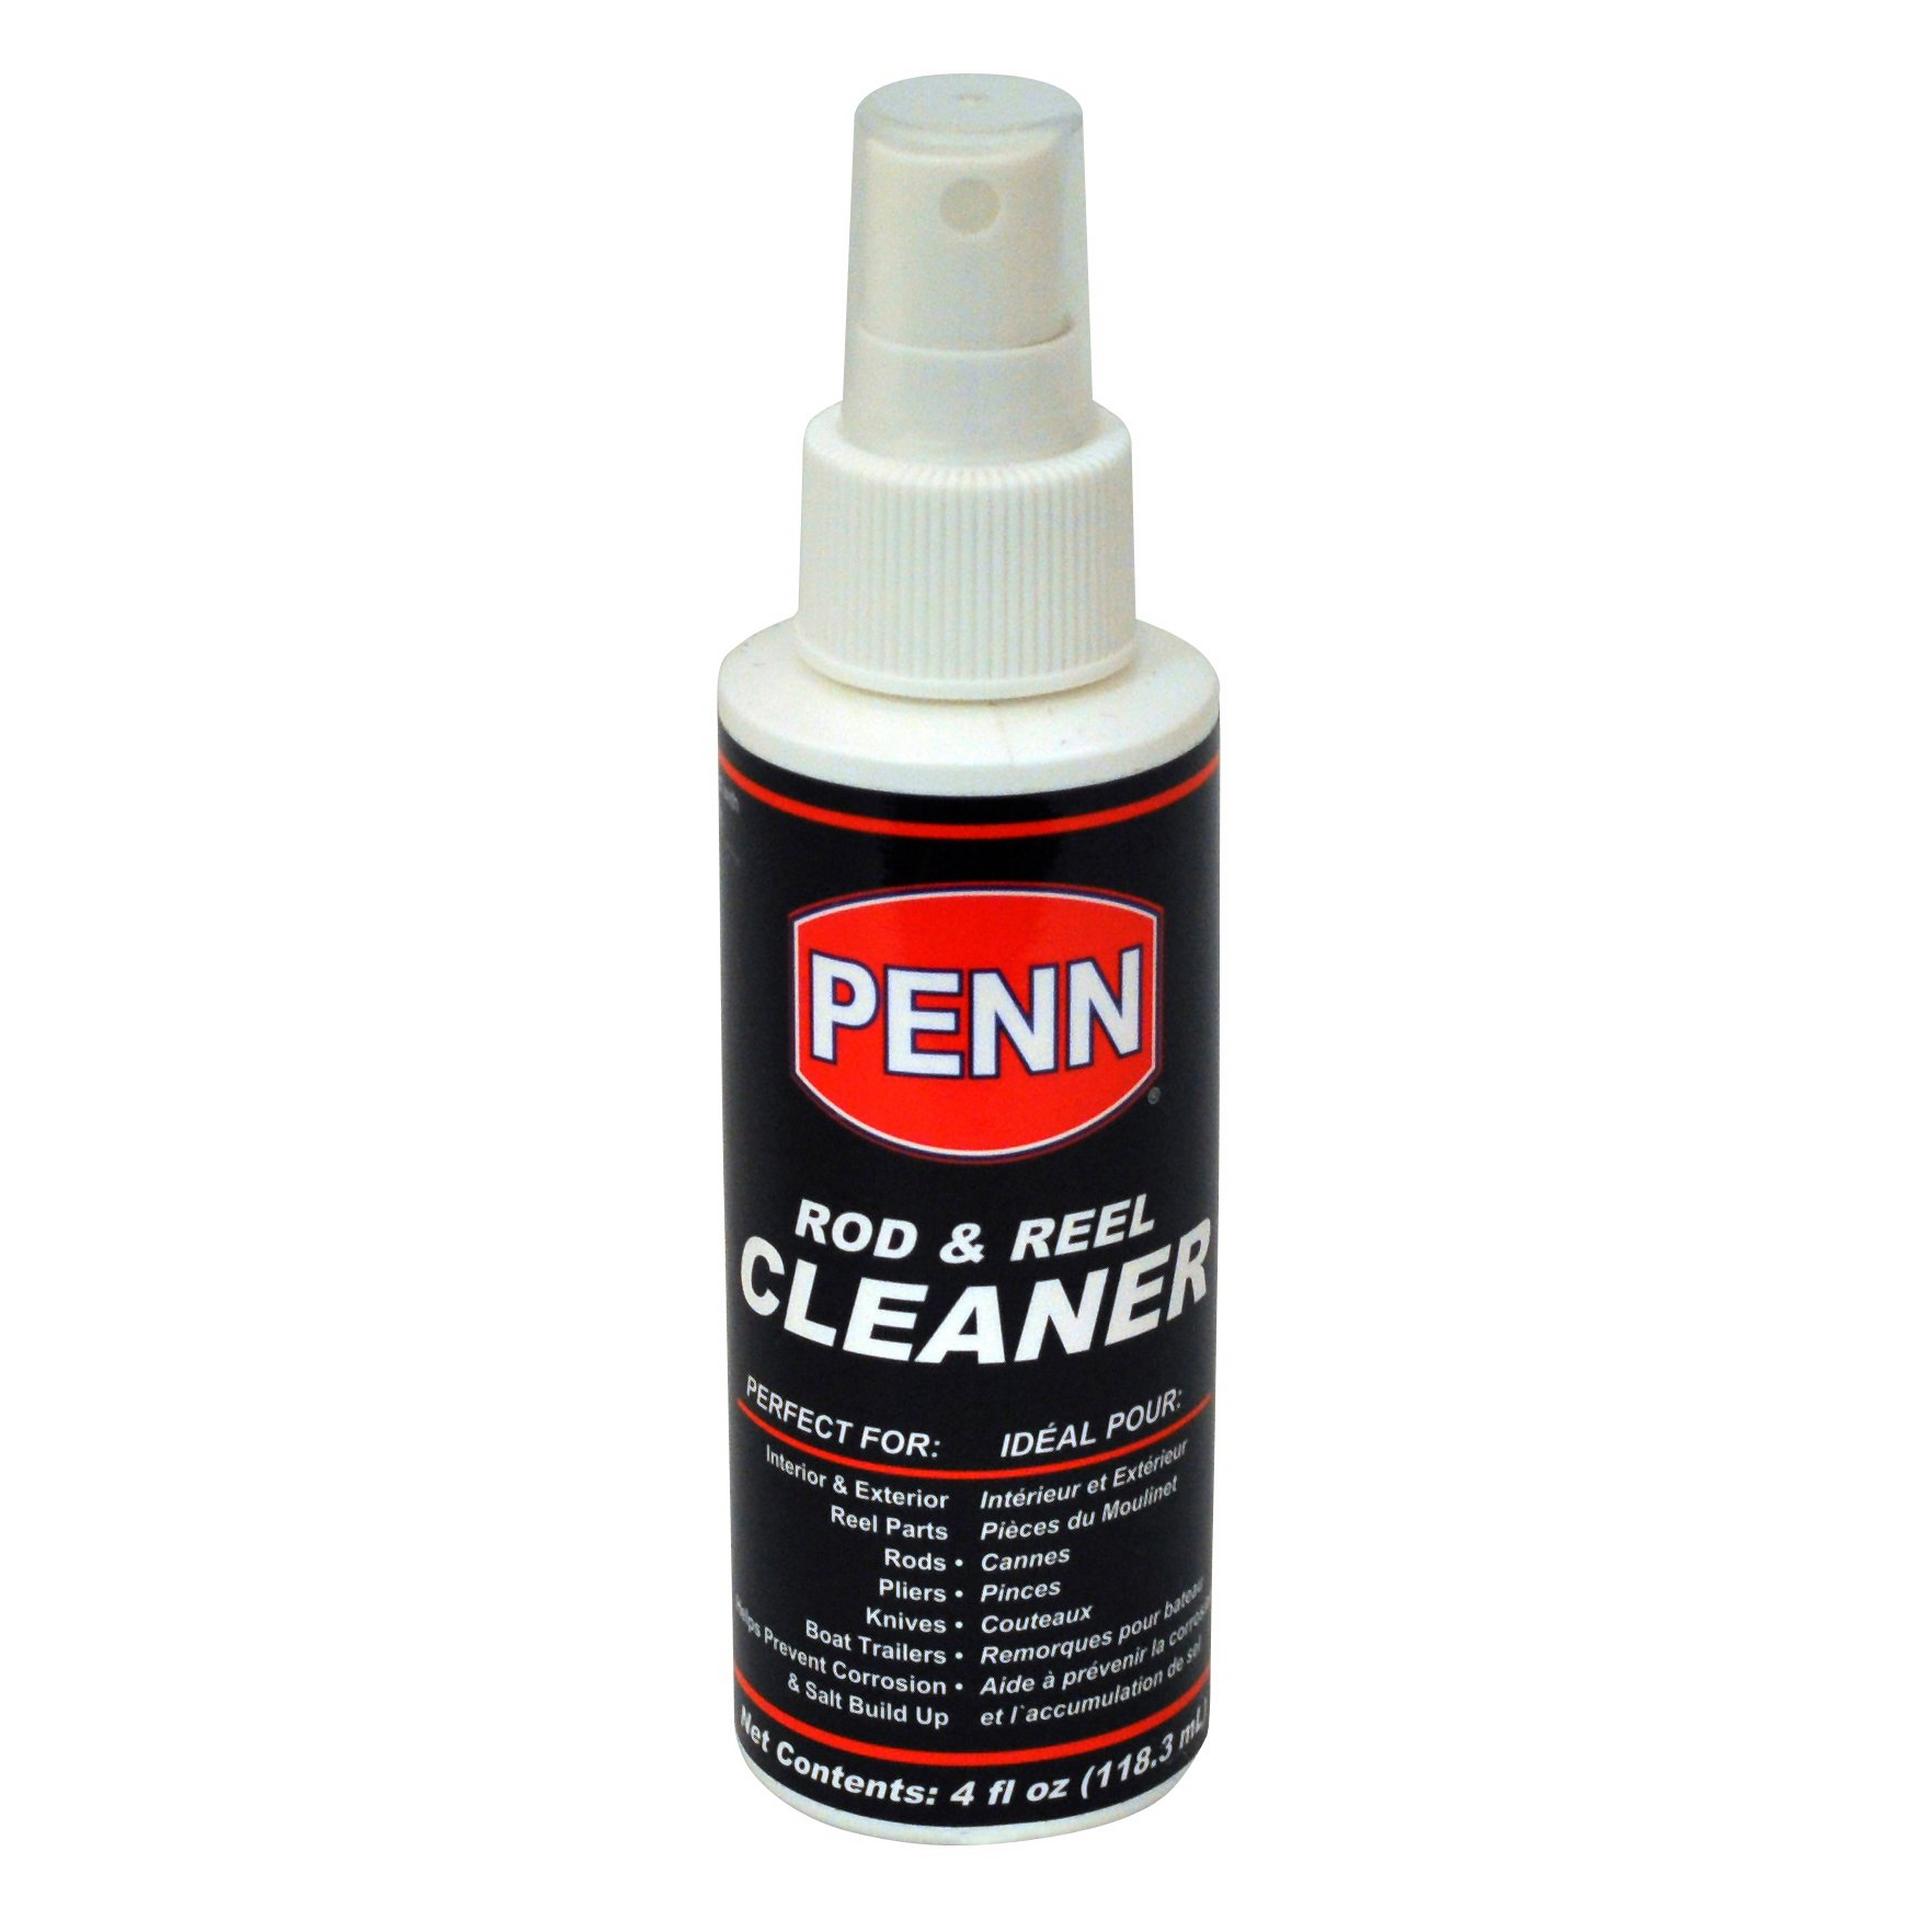 PENN Reel Grease and Oils for Fishing Reels